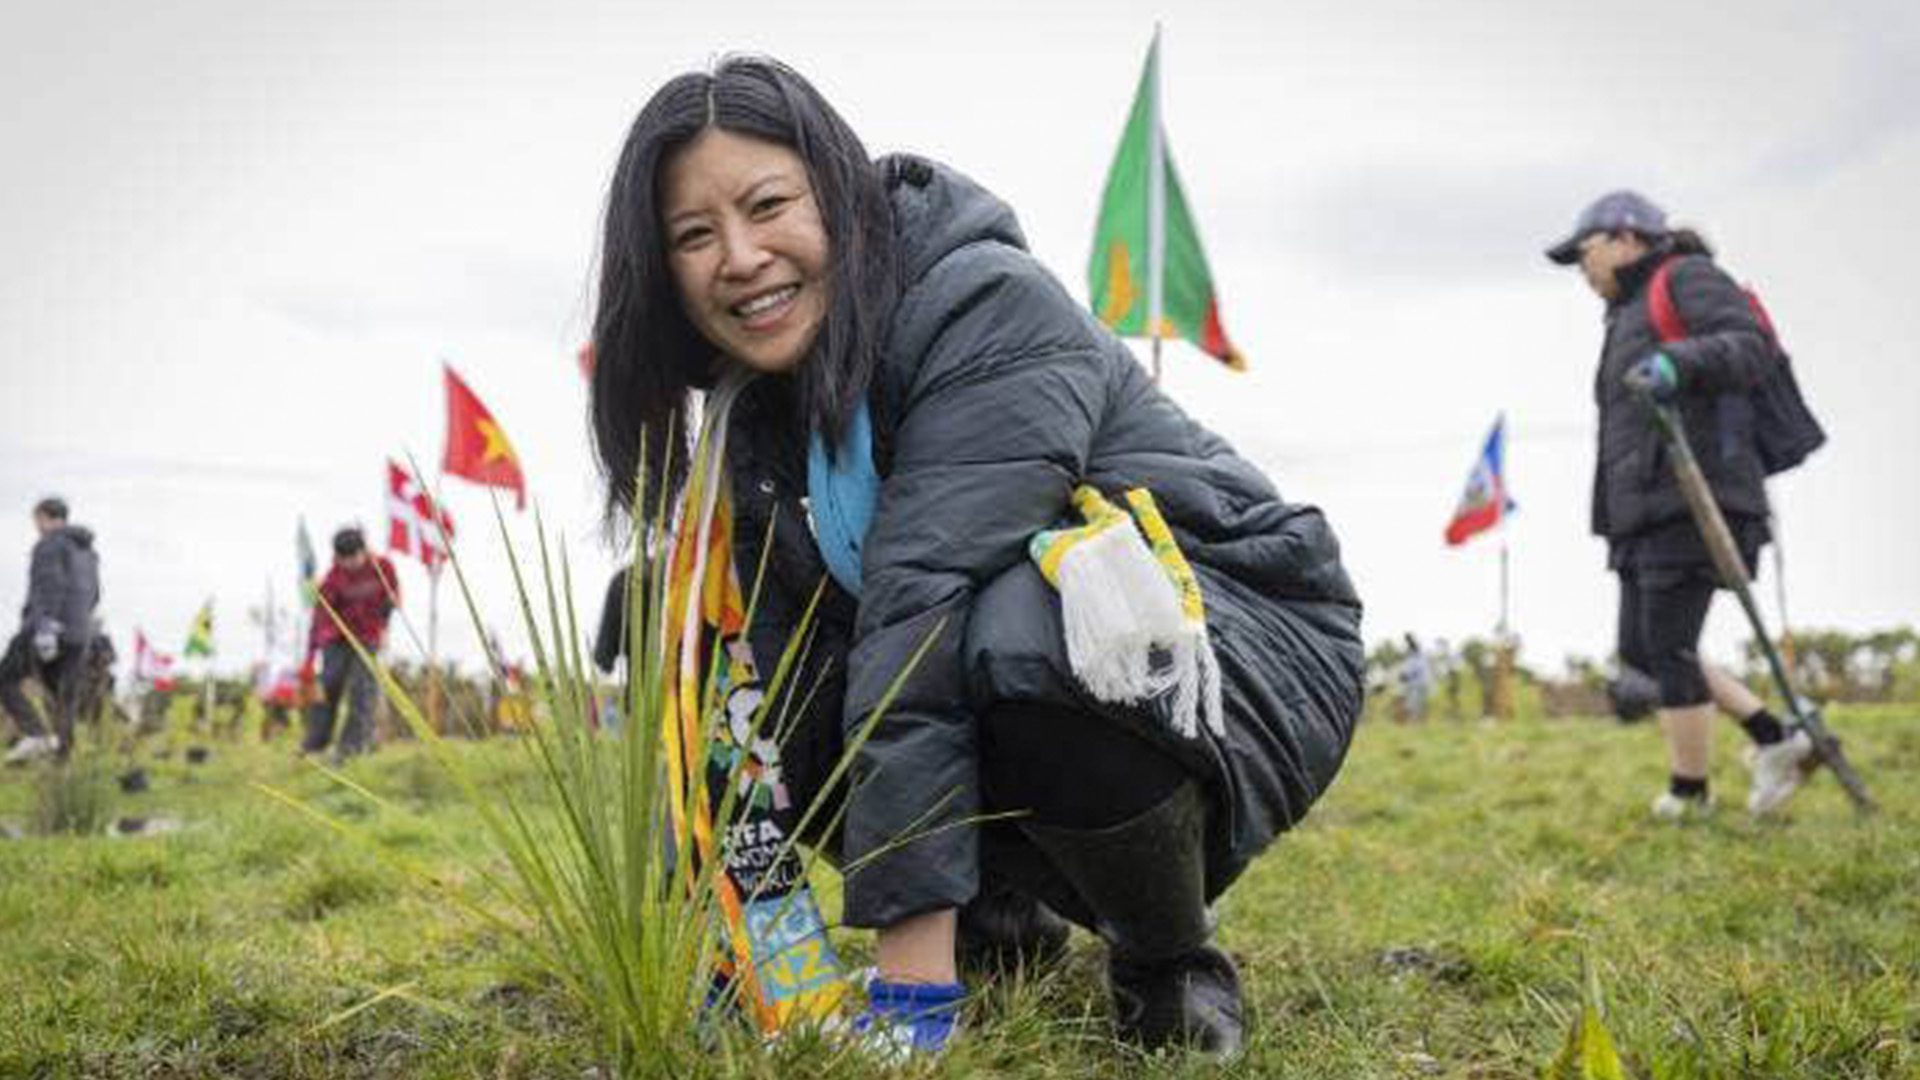 Dr. Sheila Nguyen planting trees at the Puhinui Reserve